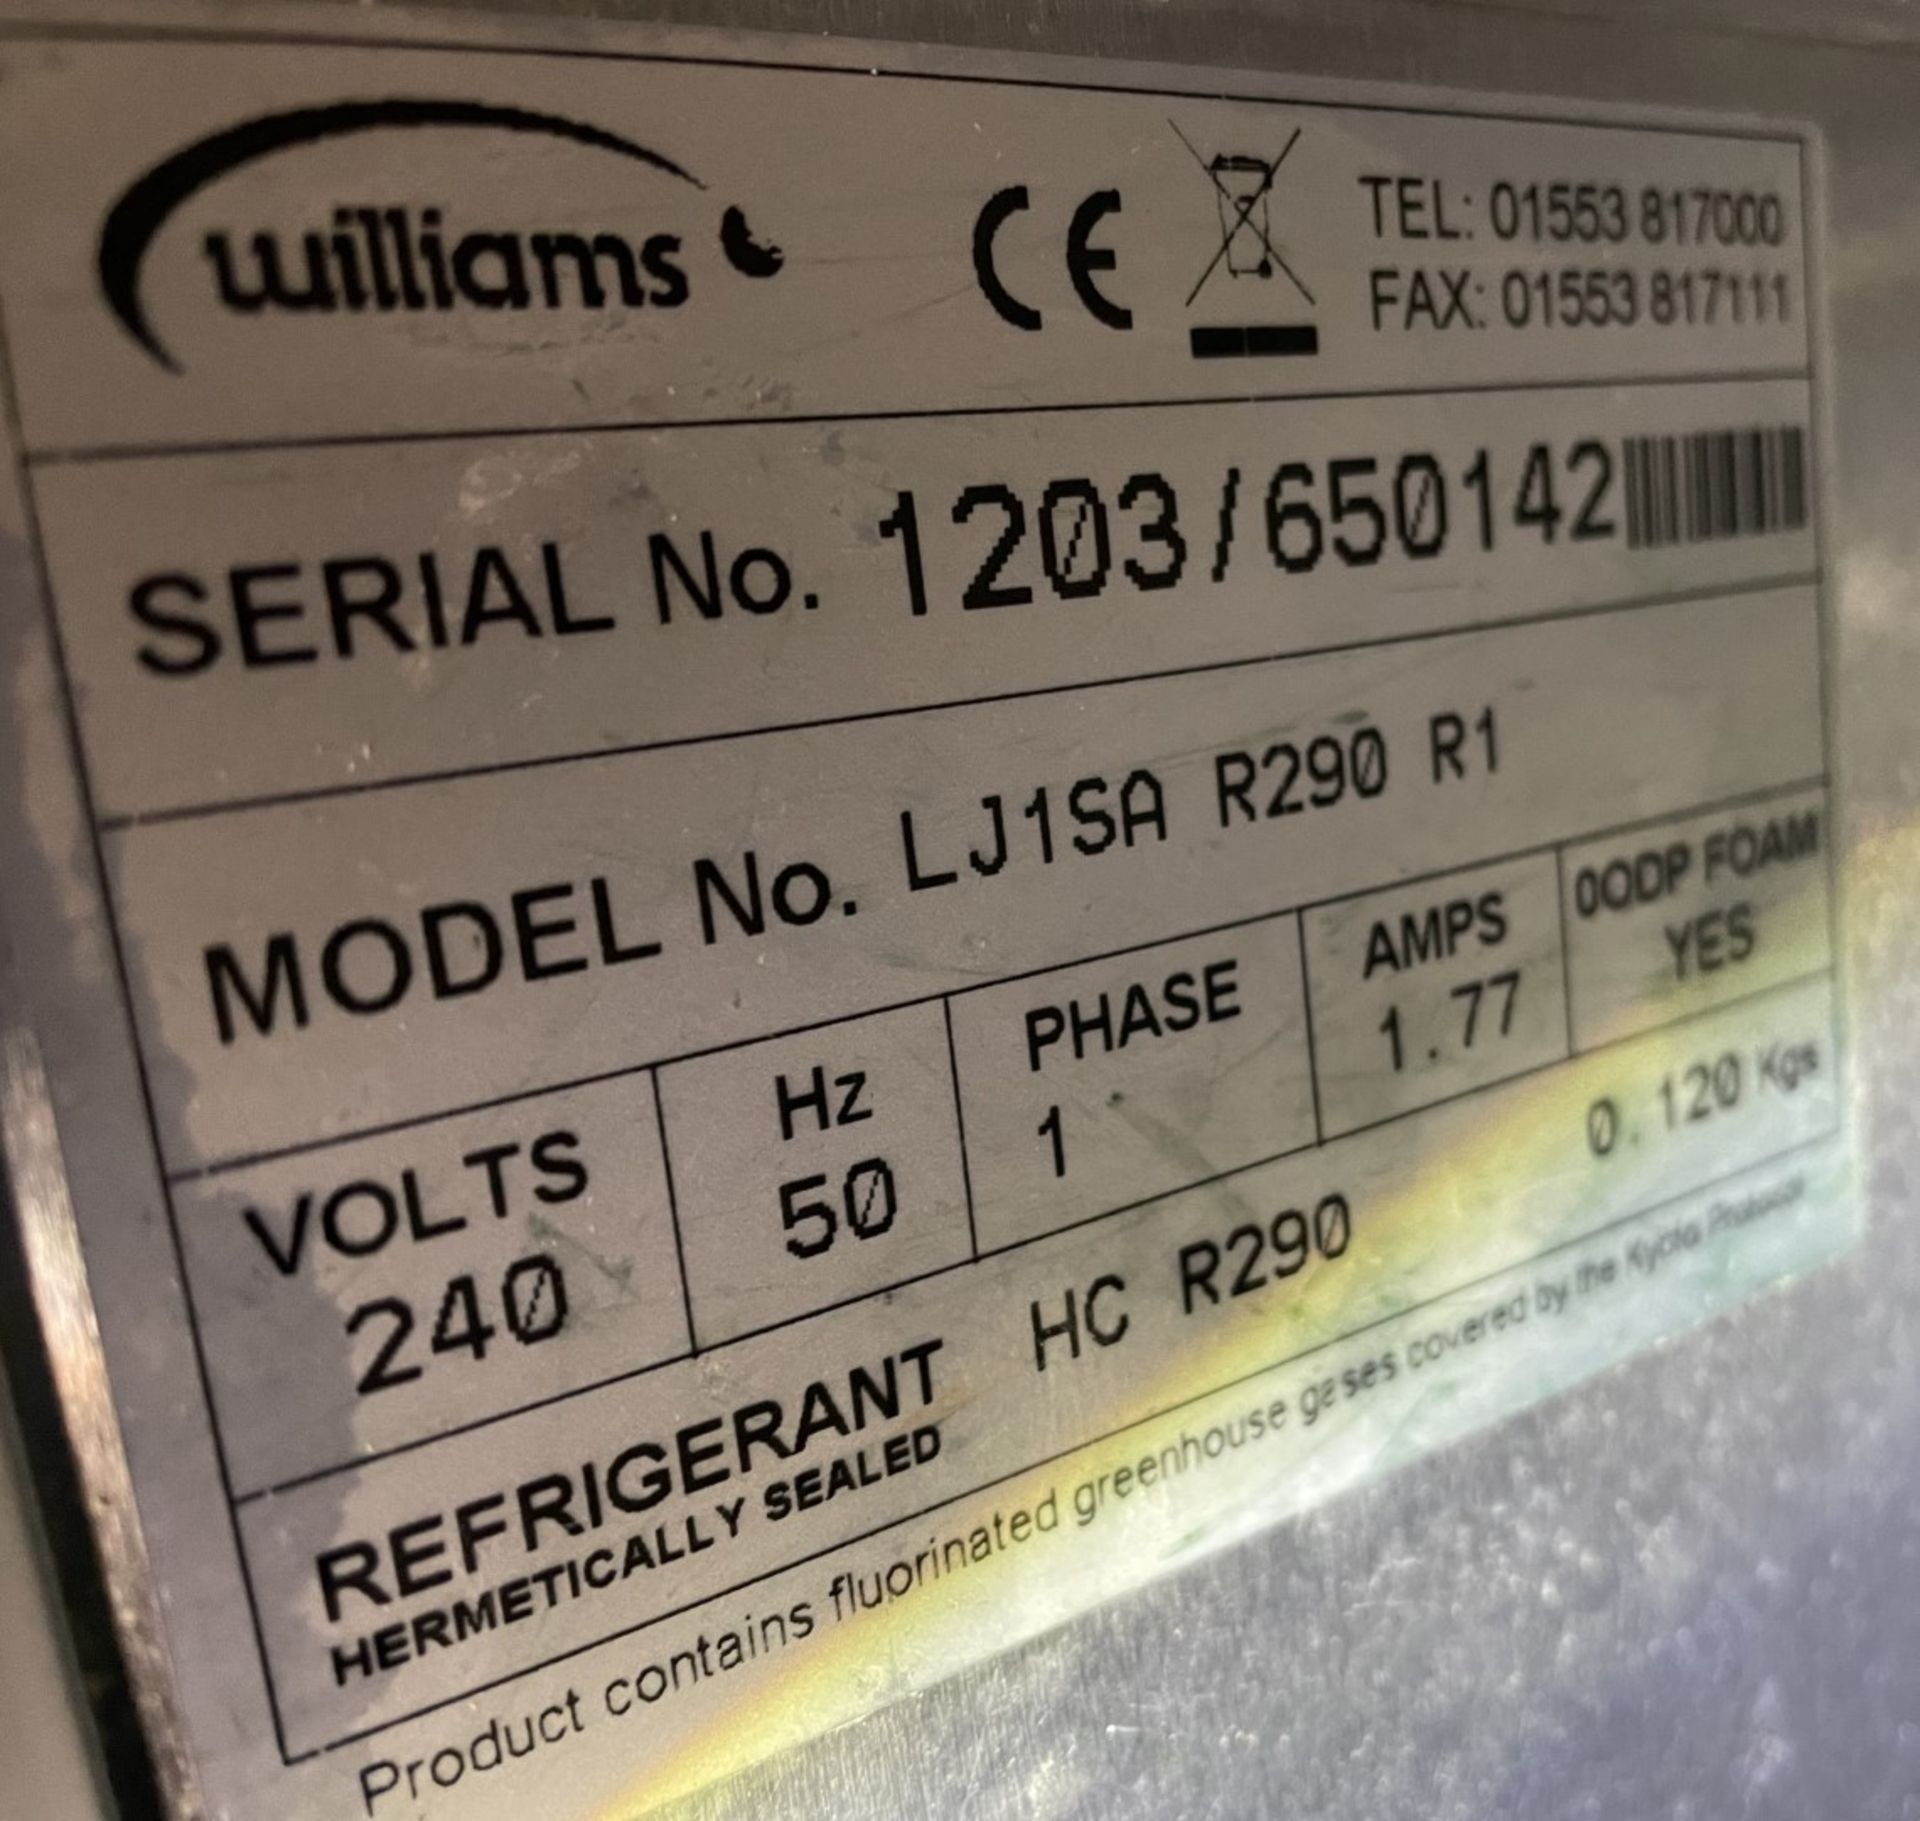 1 x Williams LJ1SA Upright Commercial Freezer With Stainless Steel Exterior - CL670 - Ref: - Image 6 of 6